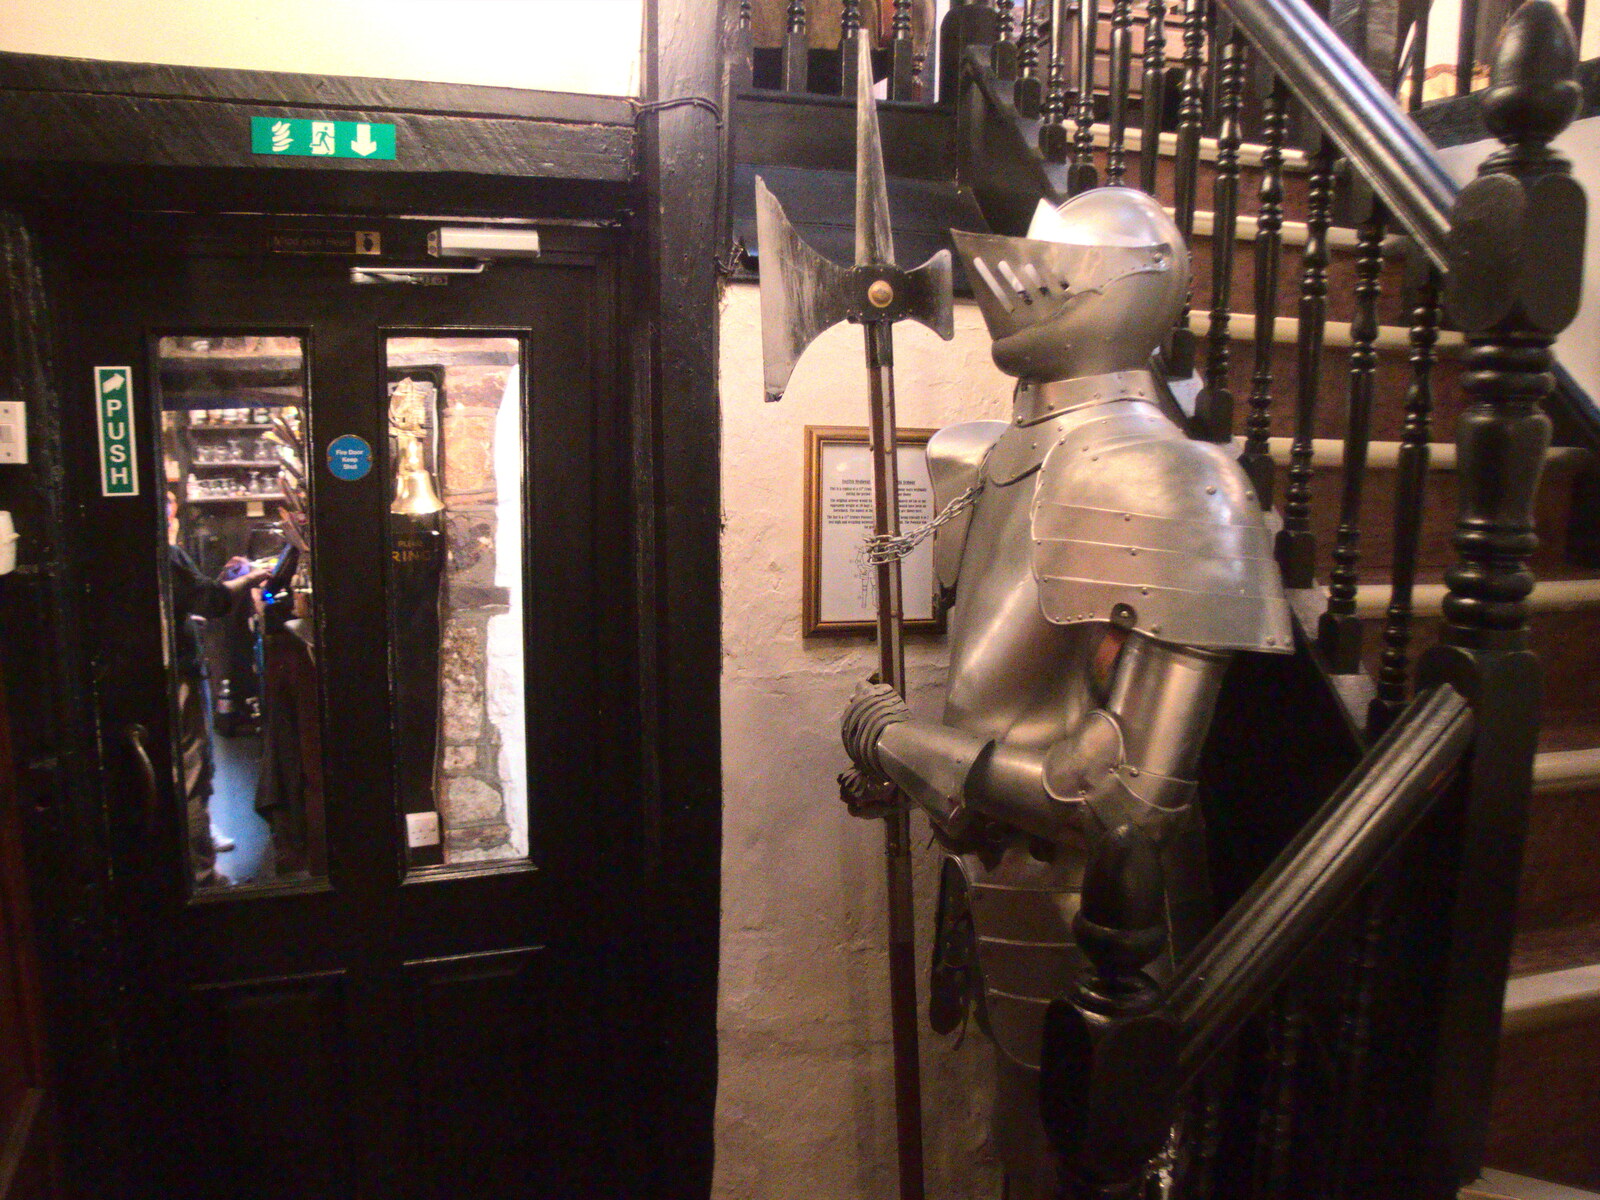 A suit of armour guards the dining room from Chilli Farms, Okehampton and the Oxenham Arms, South Zeal, Devon - 10th April 2023